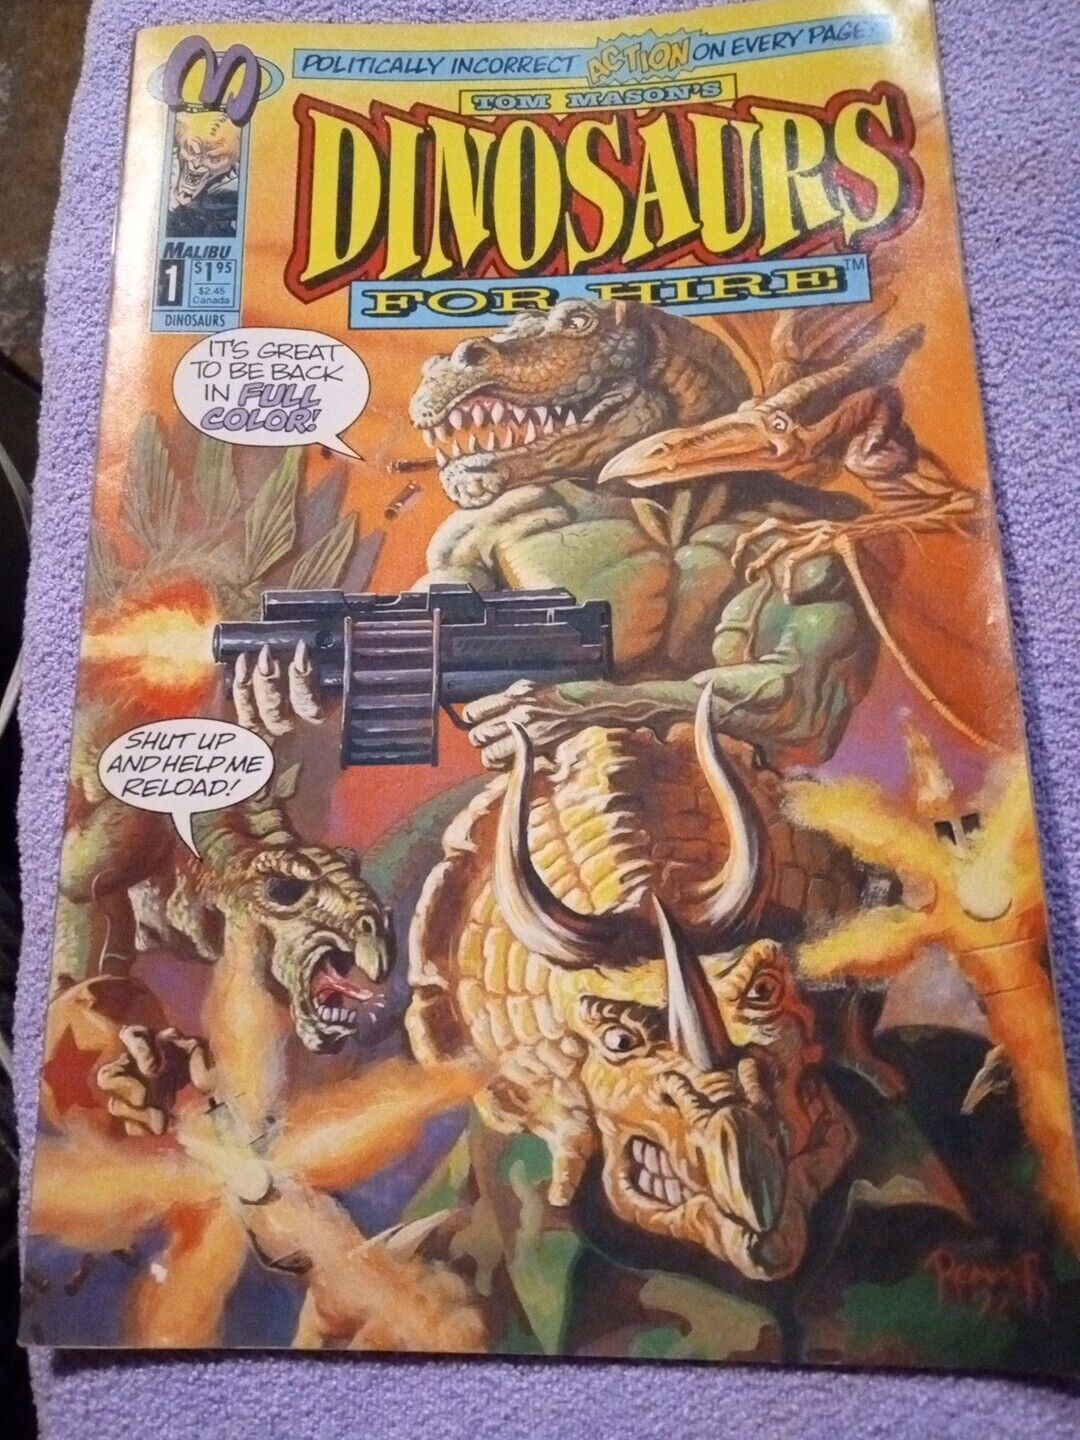 Malibu Comics Dinosaurs For Hire The Entire Series #1-12 Complete Set FN/VF 1993